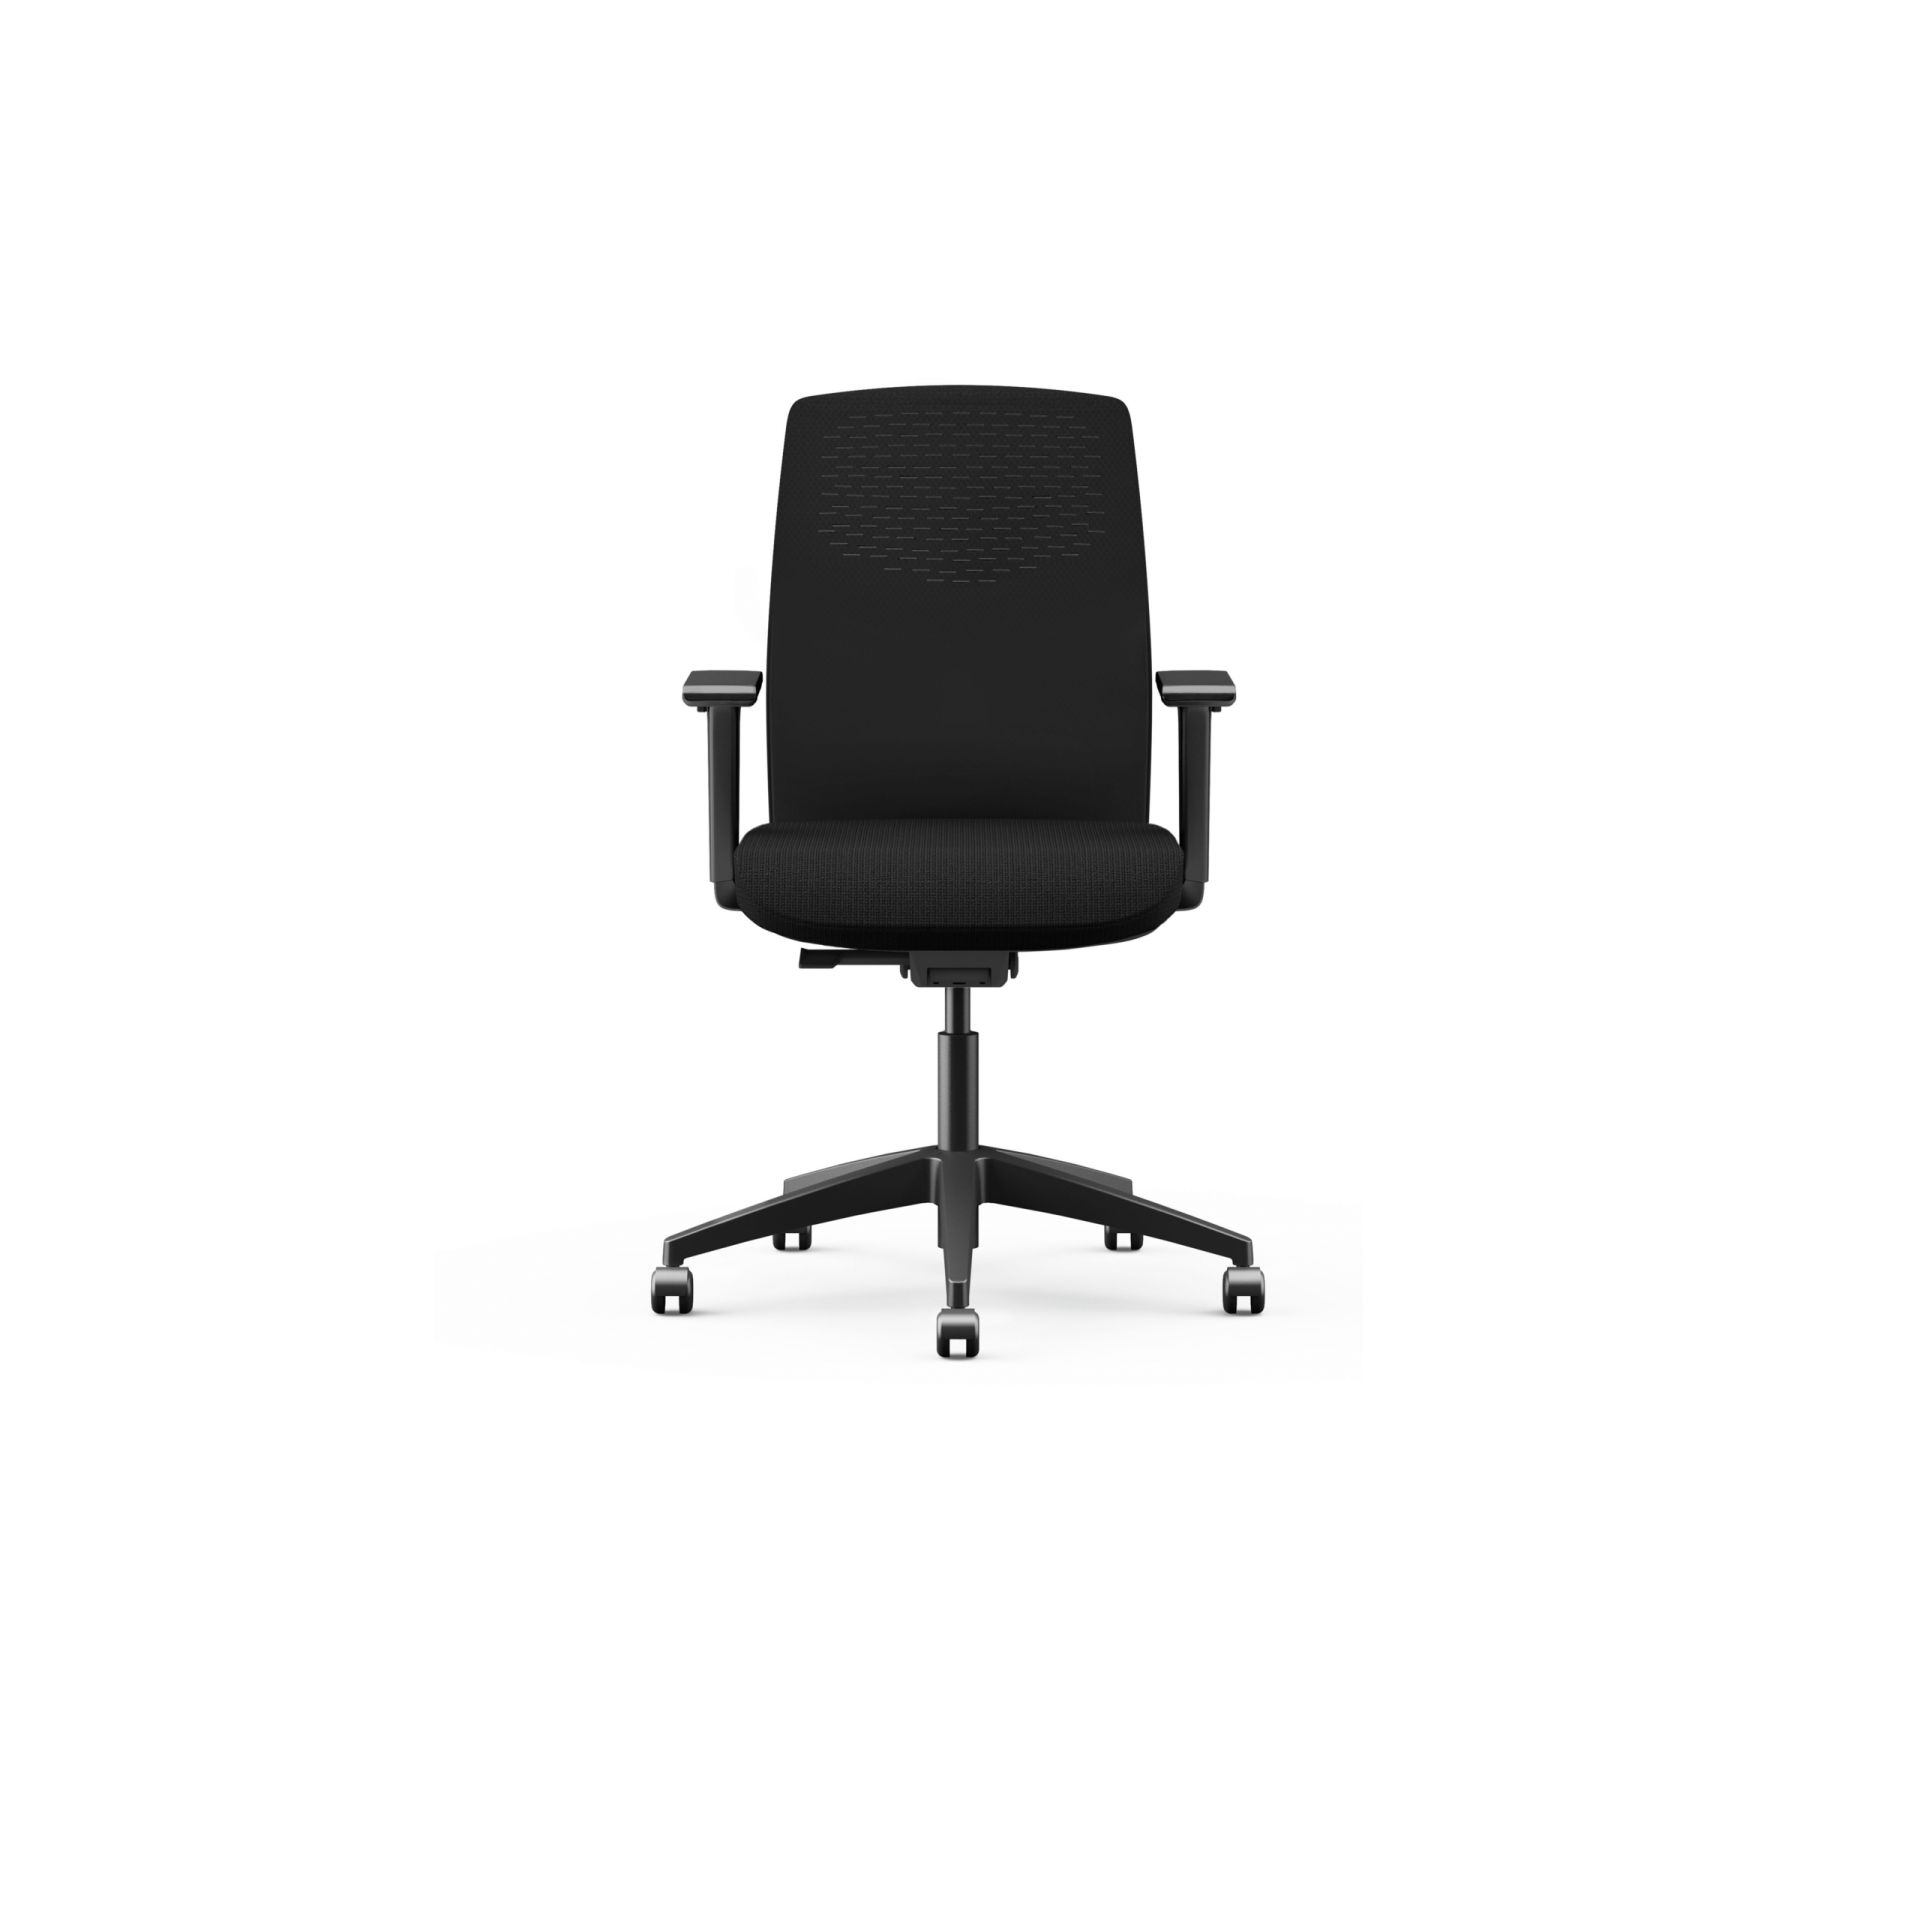 Yoyo Office chair with mesh back product image 6